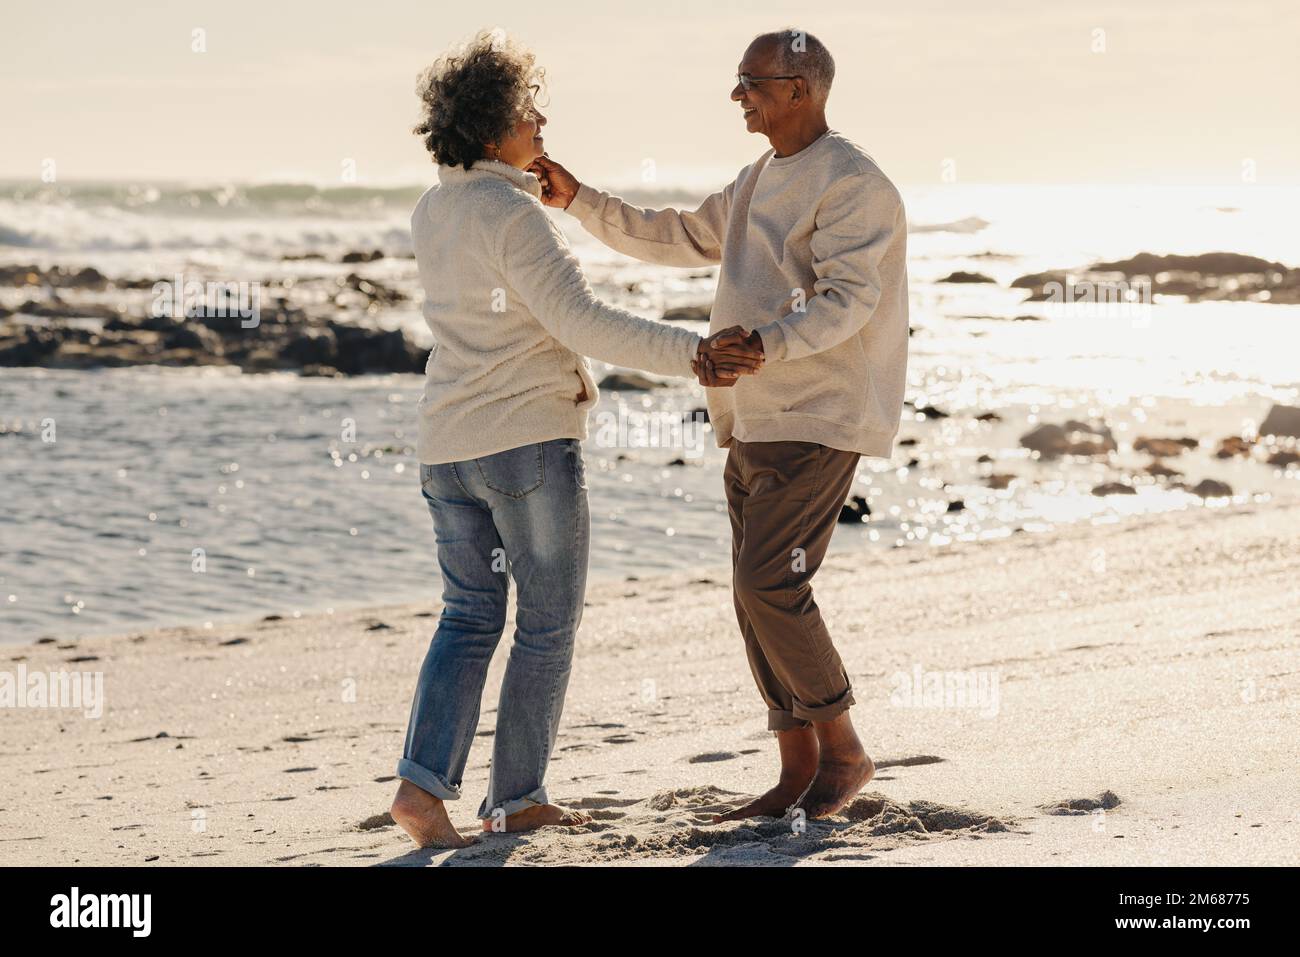 Happy elderly couple smiling and dancing together on beach sand. Mature couple having a good time next to the ocean. Cheerful senior couple enjoying t Stock Photo